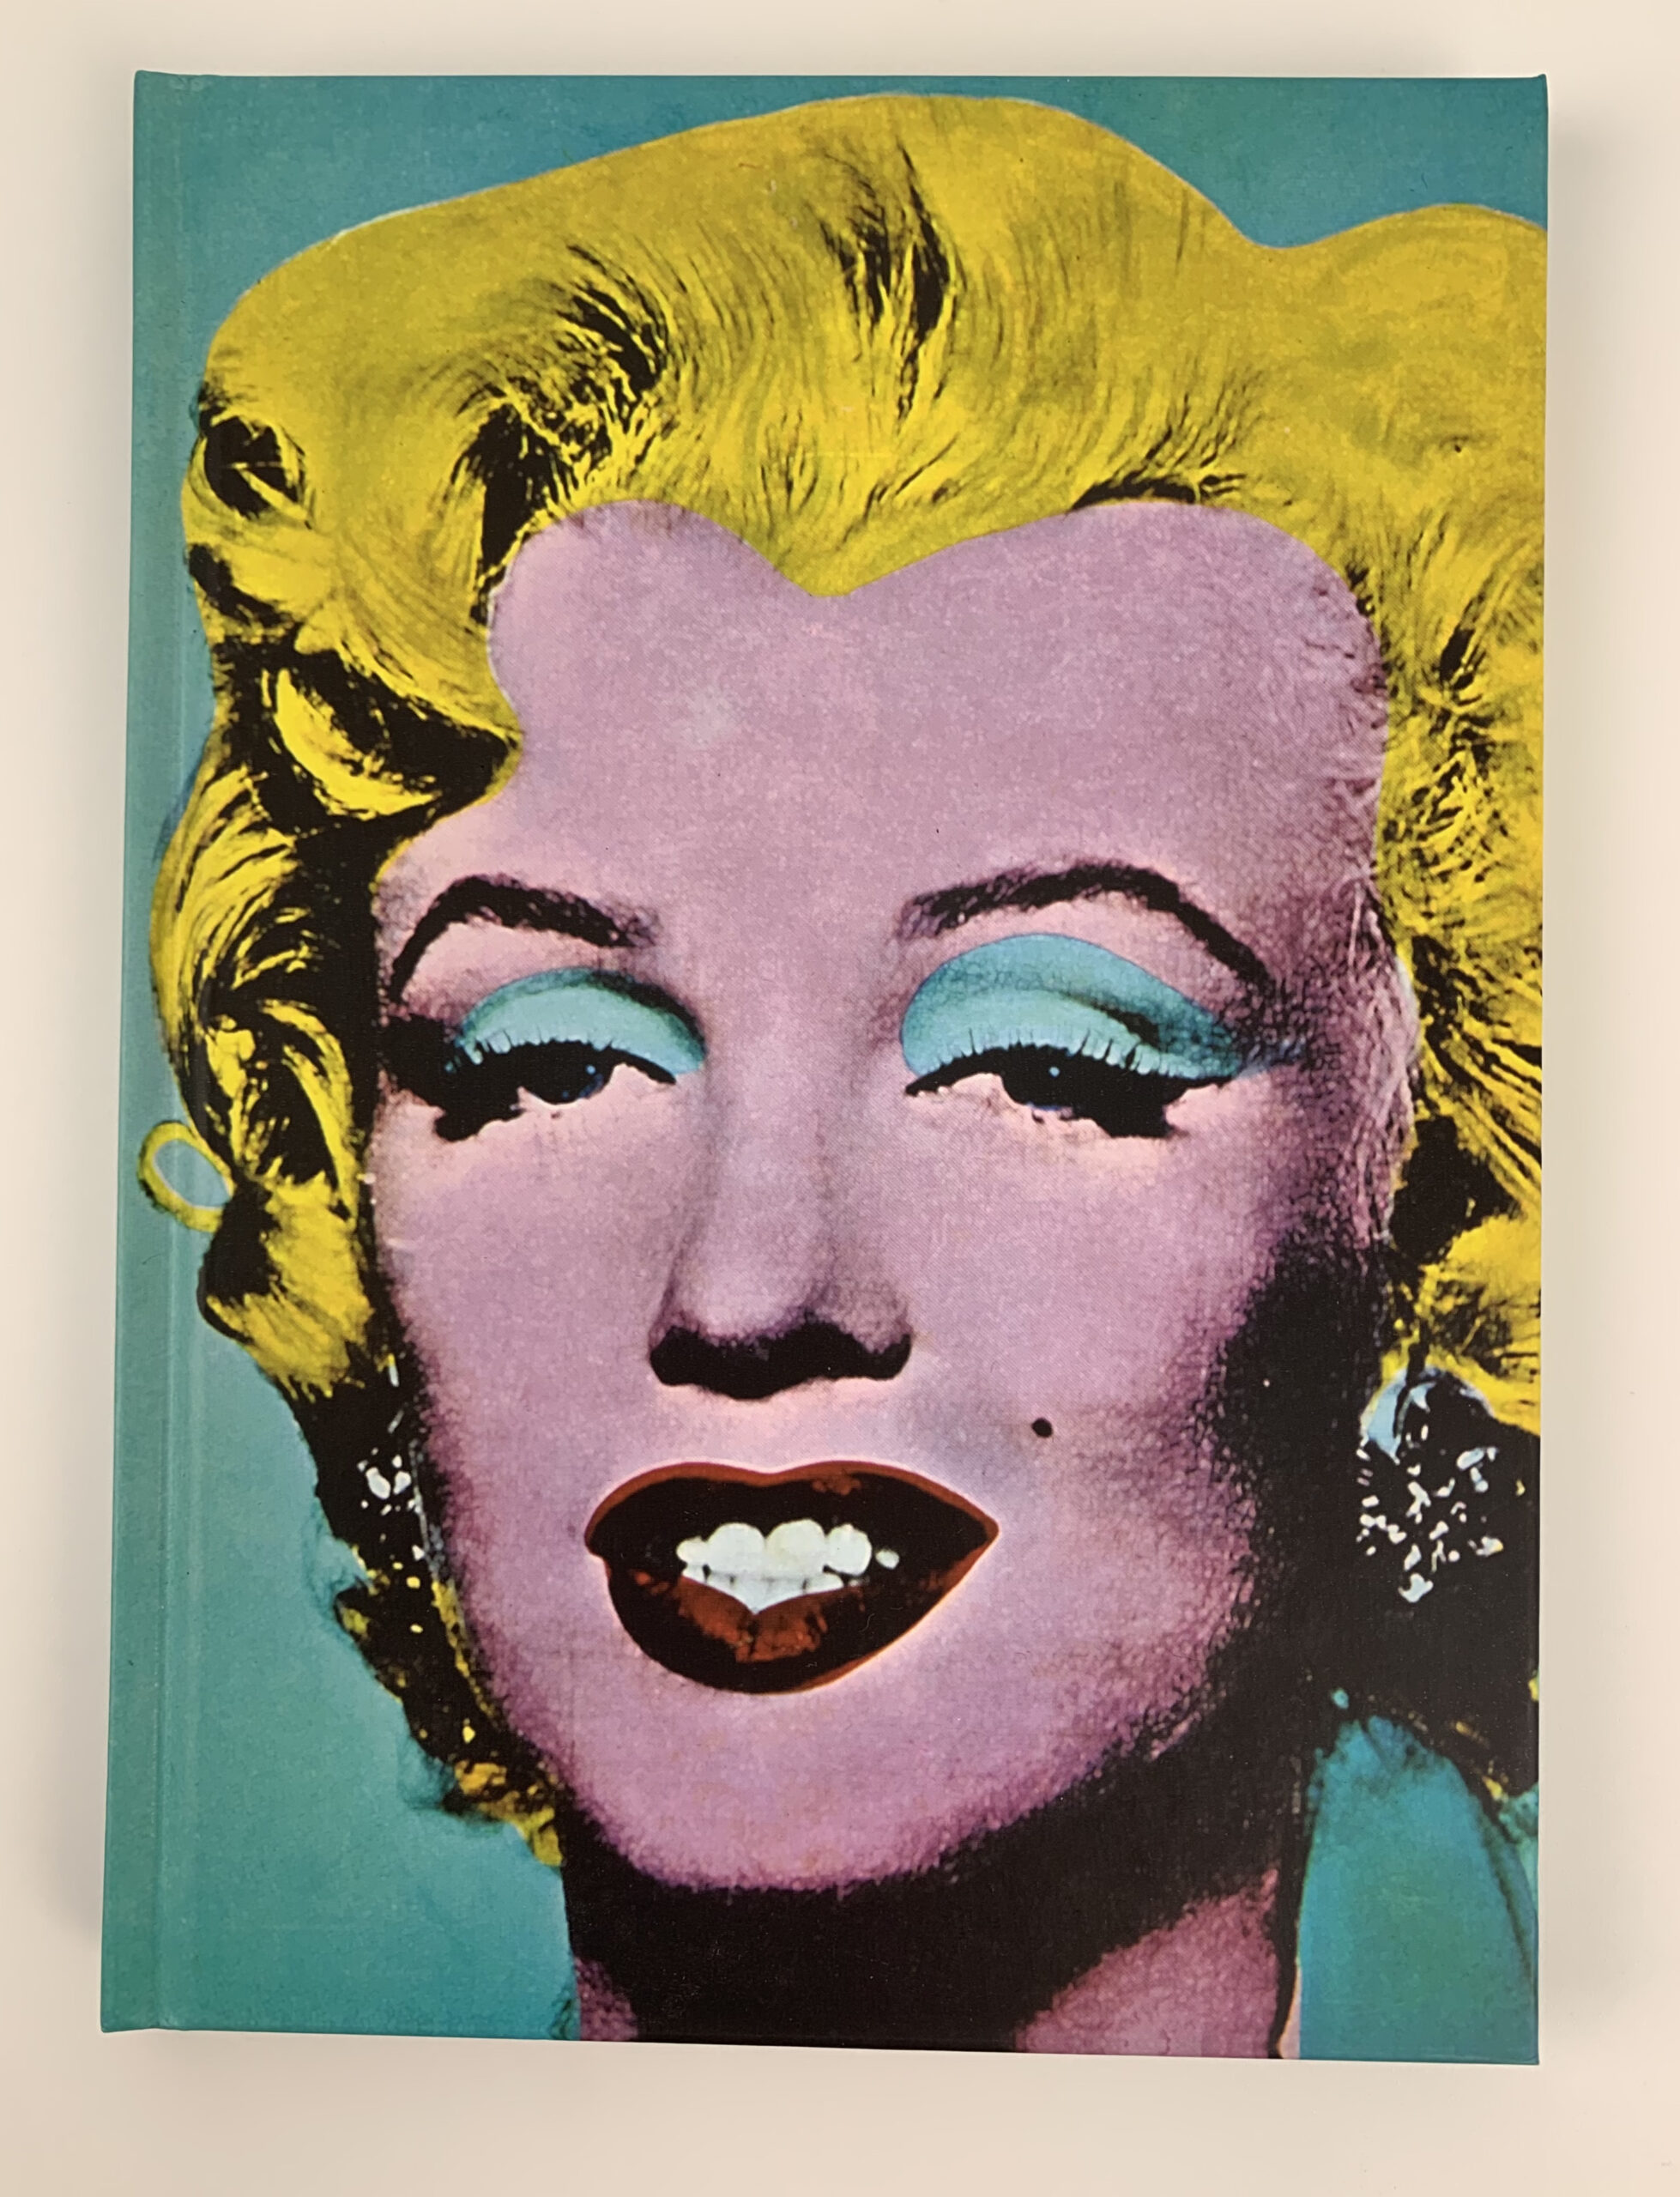 WARHOL’S MONROE JOURNAL - GO HOME... Unusual Decor and Gifts